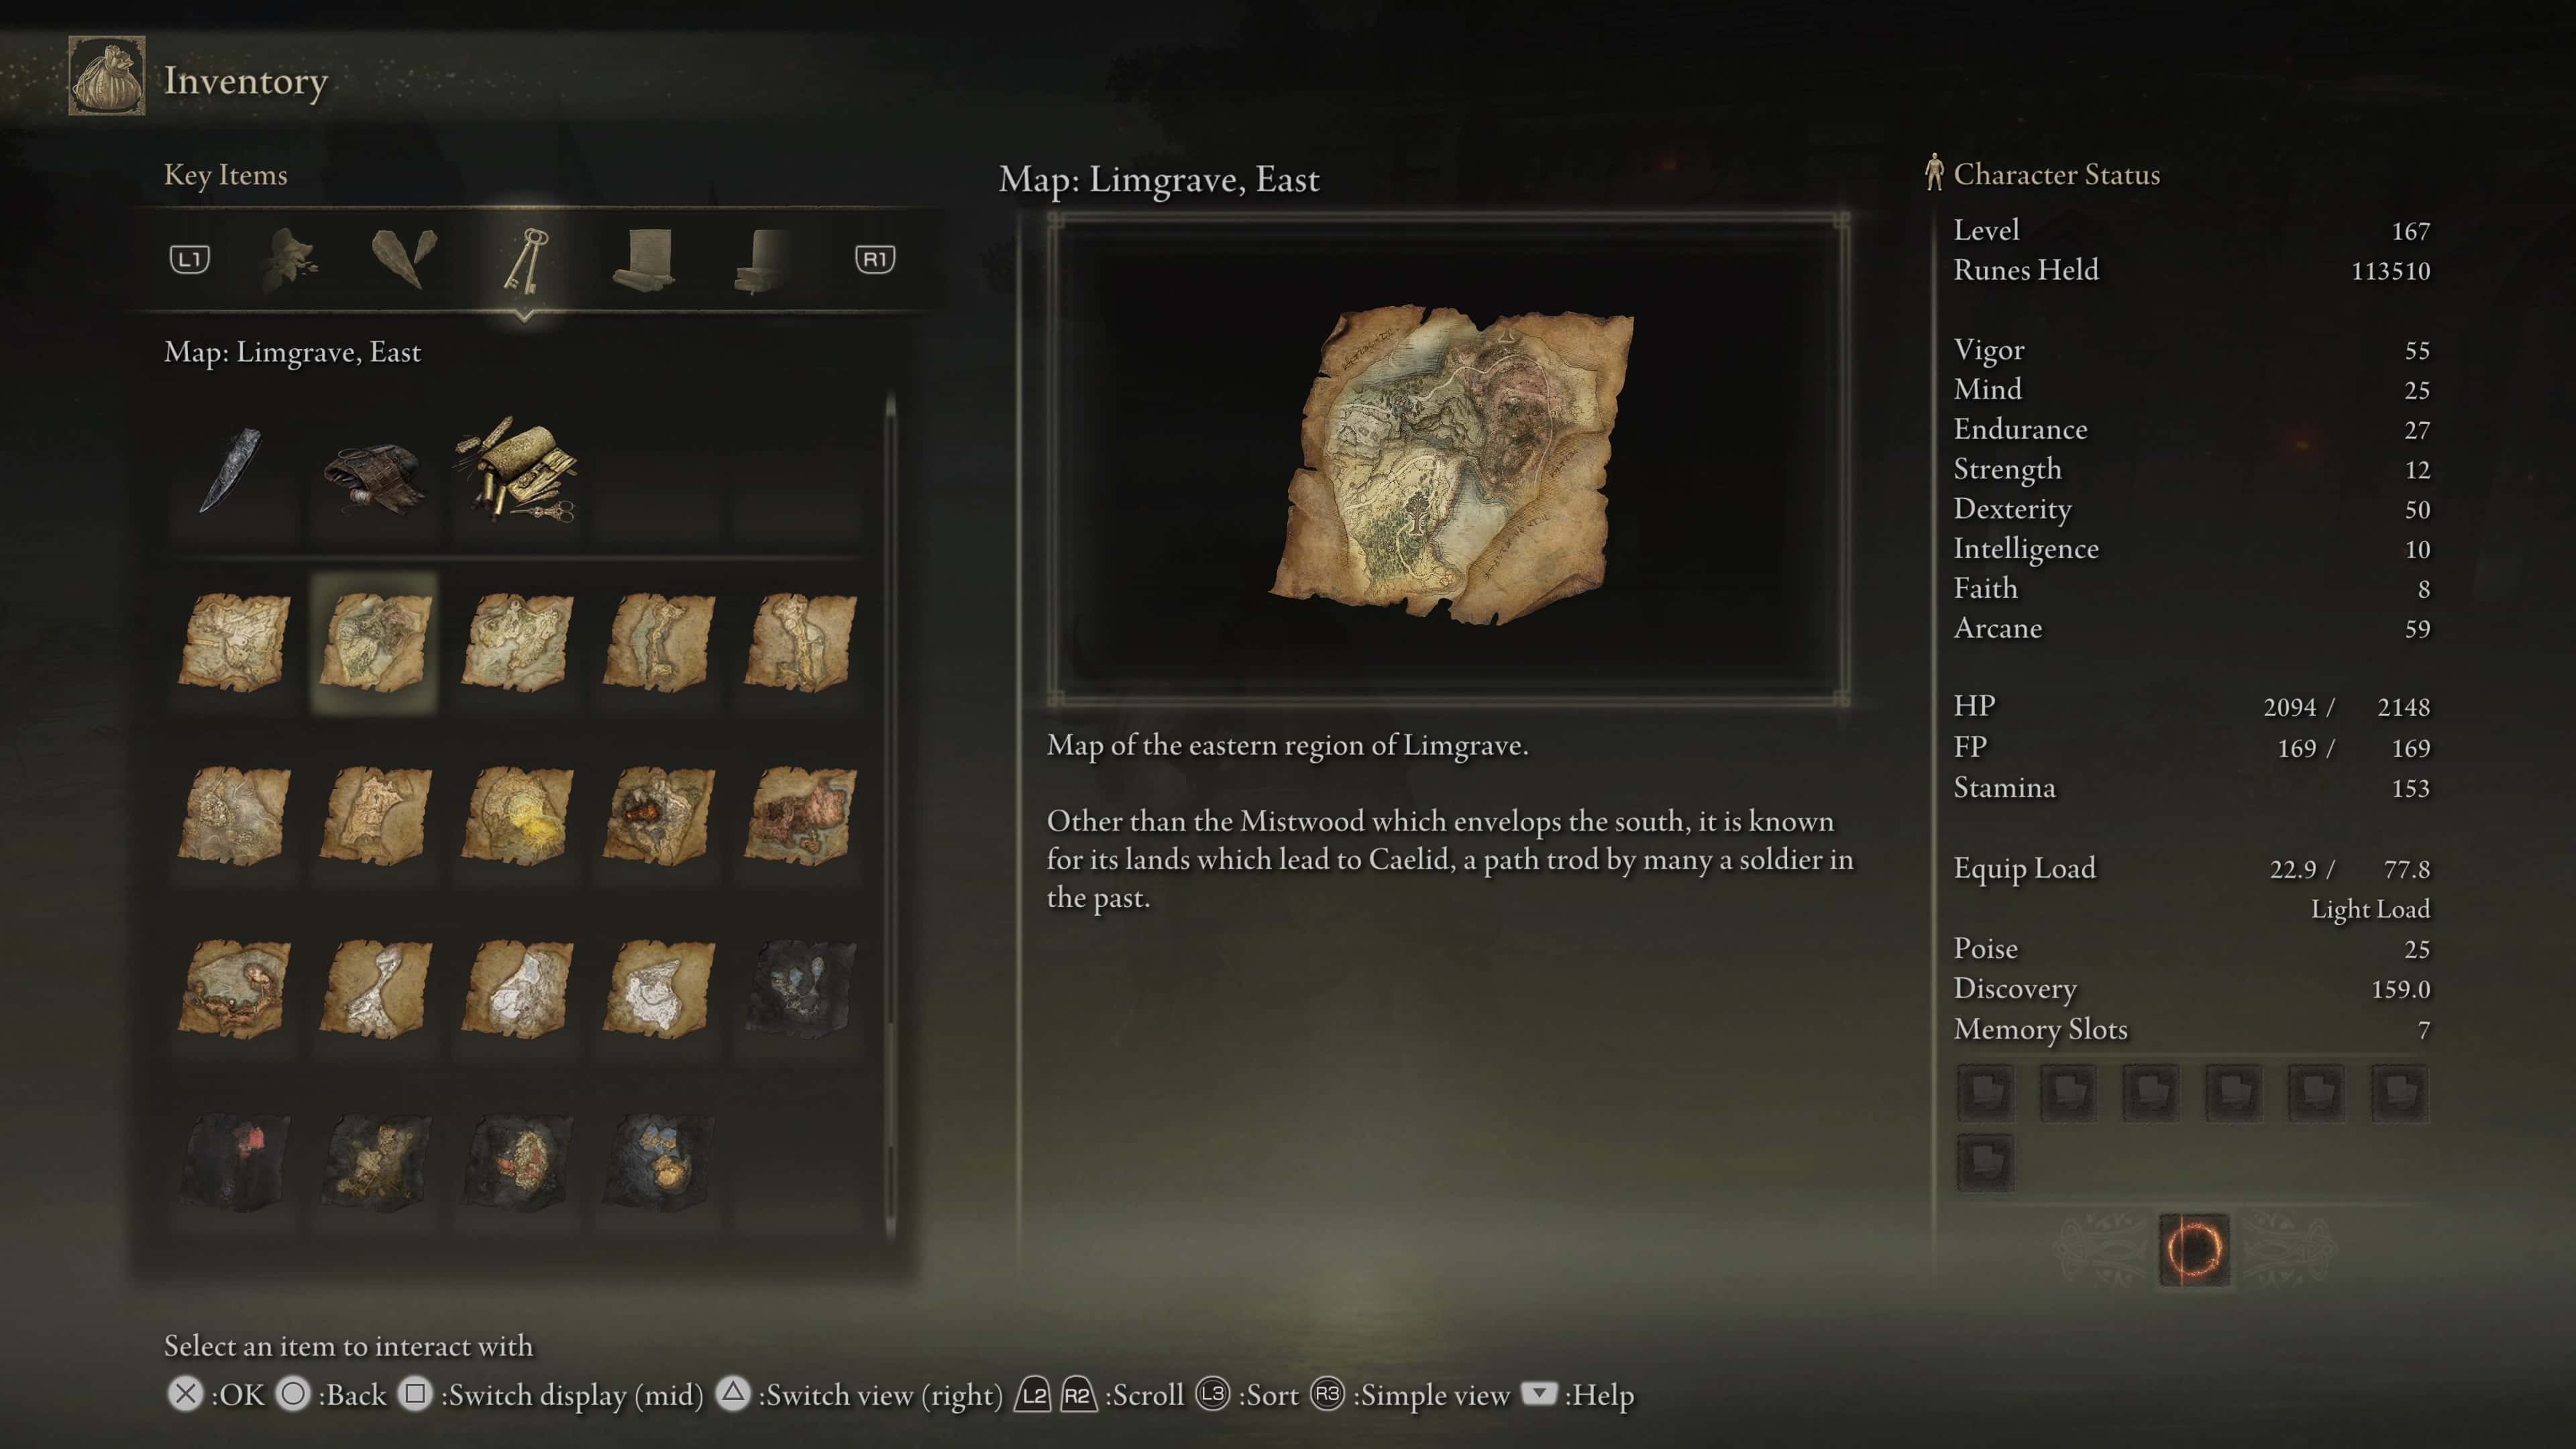 Elden Ring map fragments: One of the collected maps as seen in the Key Items tab.